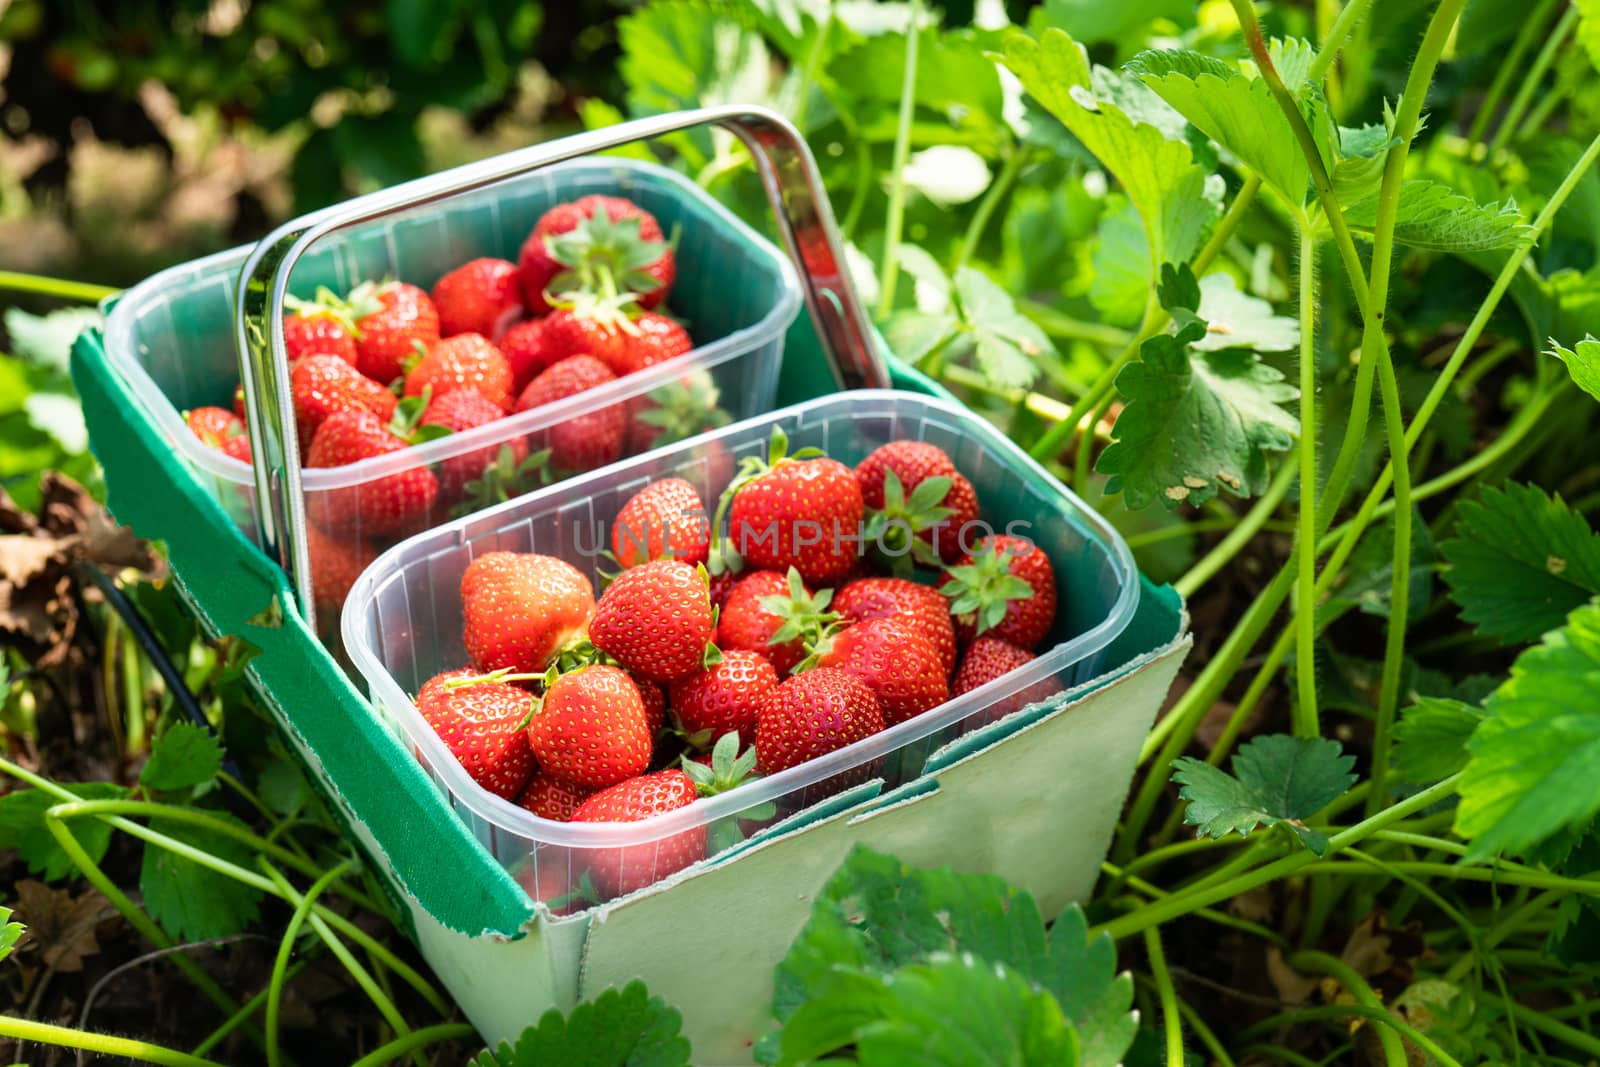 A box of fresh strawberries picked from a farm.